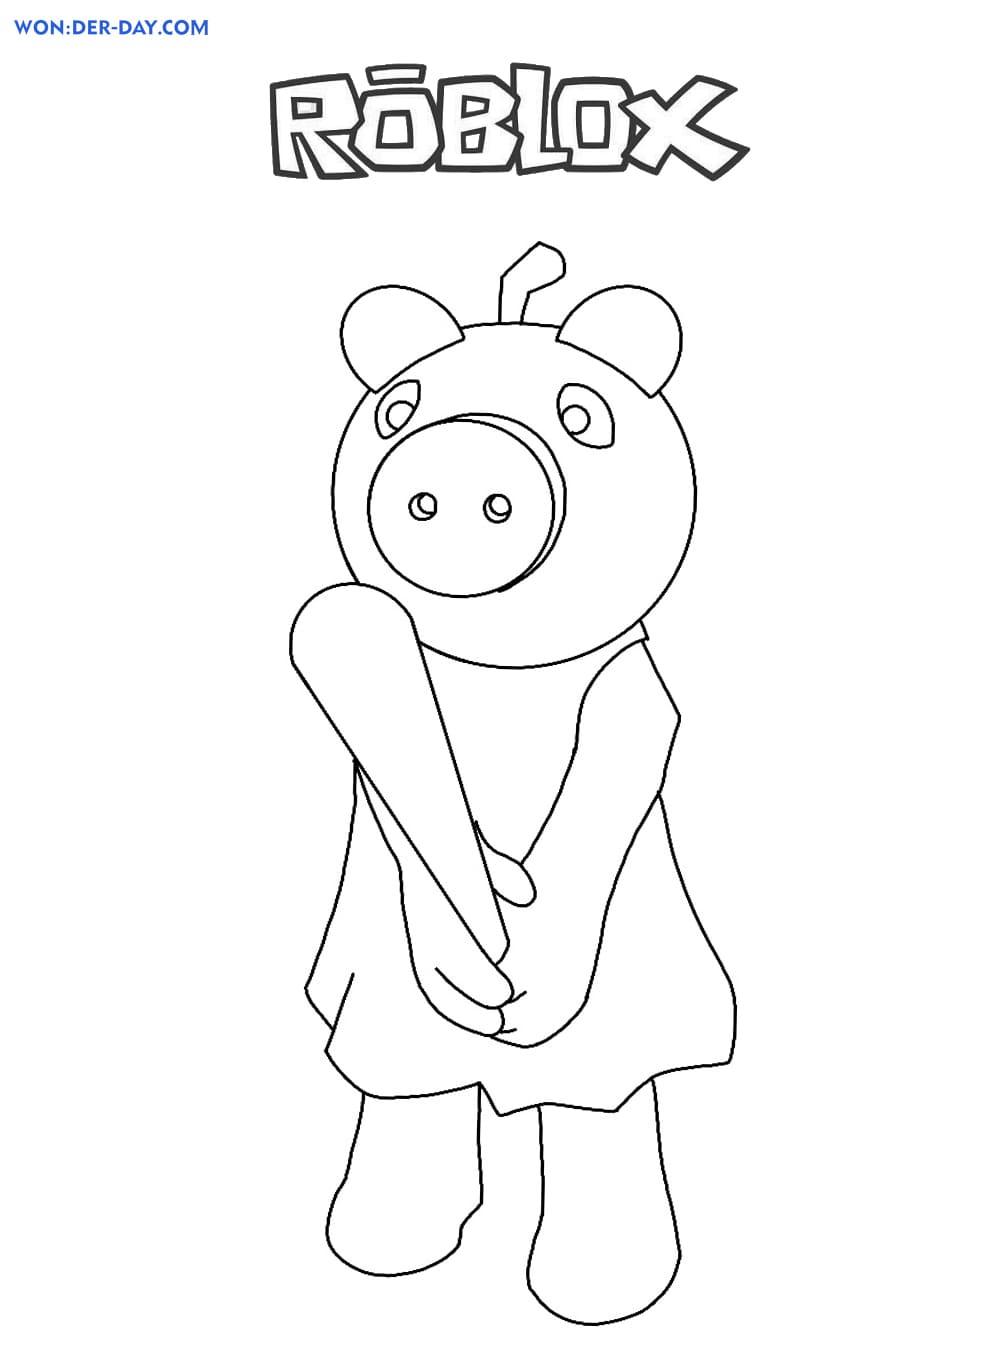 Piggy Roblox coloring pages | WONDER DAY — Coloring pages for children ...